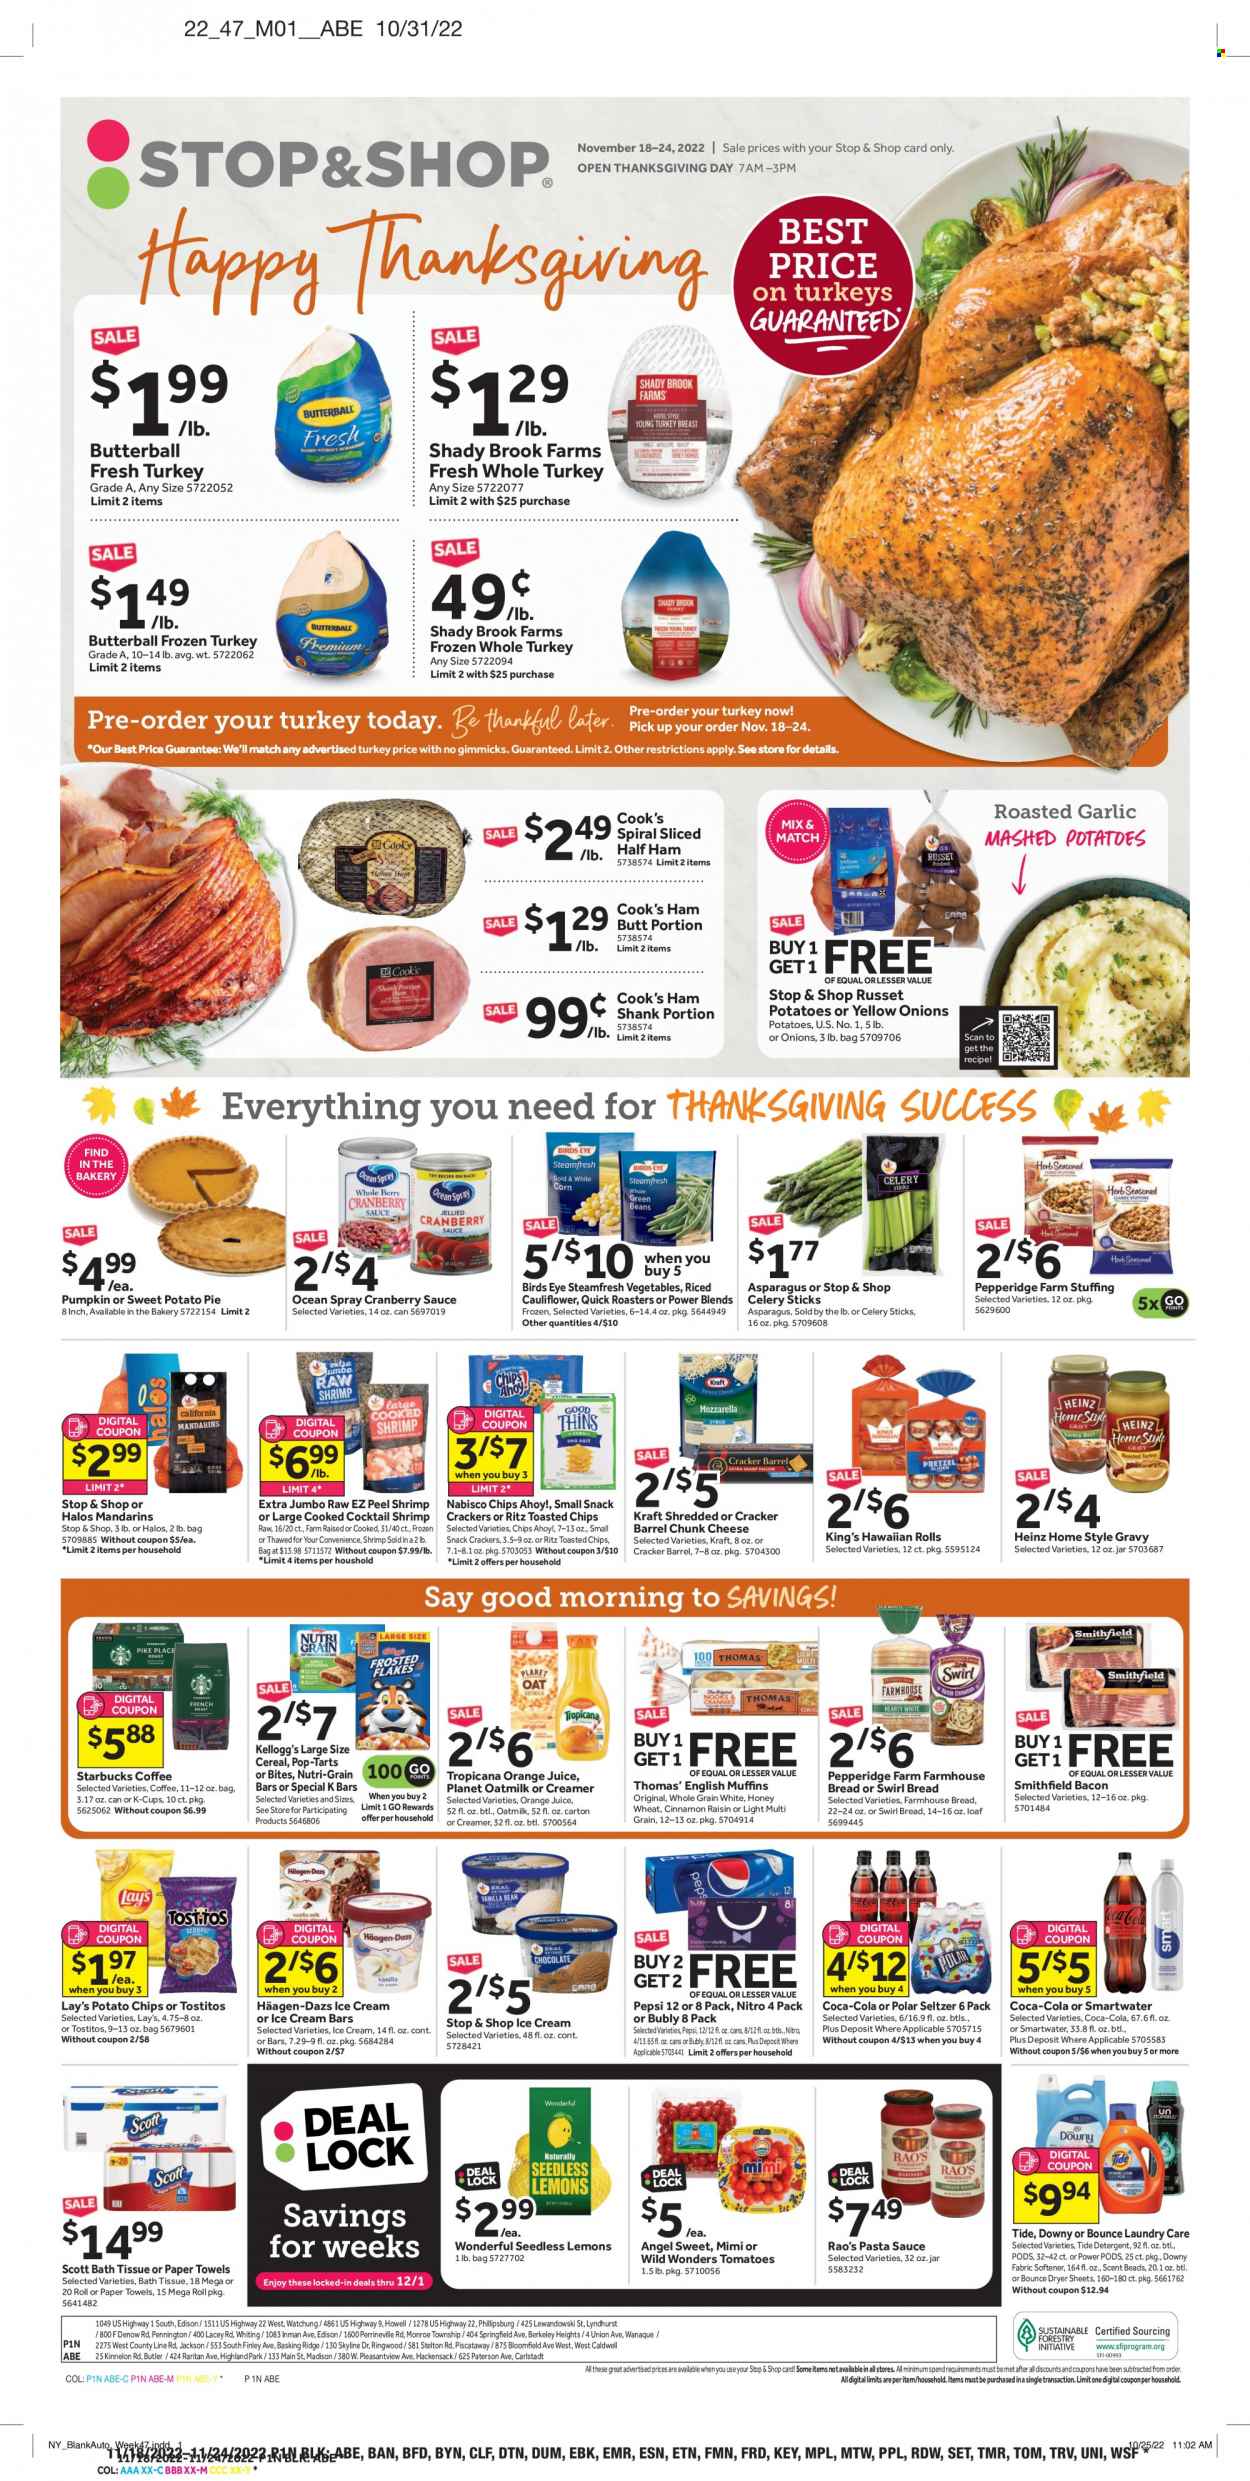 Stop & Shop Flyer - 11/18/2022 - 11/24/2022 - Sales products - english muffins, hawaiian rolls, russet potatoes, sweet potato, tomatoes, mandarines, Butterball, turkey breast, whole turkey, turkey meat, shrimps, whiting, mashed potatoes, pasta sauce, sauce, Bird's Eye, Kraft®, bacon, half ham, ham, ham shank, Cook's, Stilton cheese, cheese, chunk cheese, oat milk, oatmilk, creamer, ice cream, ice cream bars, Häagen-Dazs, snack, crackers, Kellogg's, Pop-Tarts, Chips Ahoy!, RITZ, potato chips, Lay's, Thins, Tostitos, celery sticks, oats, Heinz, cereals, Frosted Flakes, Nutri-Grain, cranberry sauce, Coca-Cola, Pepsi, orange juice, juice, seltzer water, Smartwater, coffee, Starbucks, coffee capsules, K-Cups, bath tissue, Scott, kitchen towels, paper towels, detergent, Tide, fabric softener, Bounce, dryer sheets, Downy laundry, pin, lemons. Page 1.